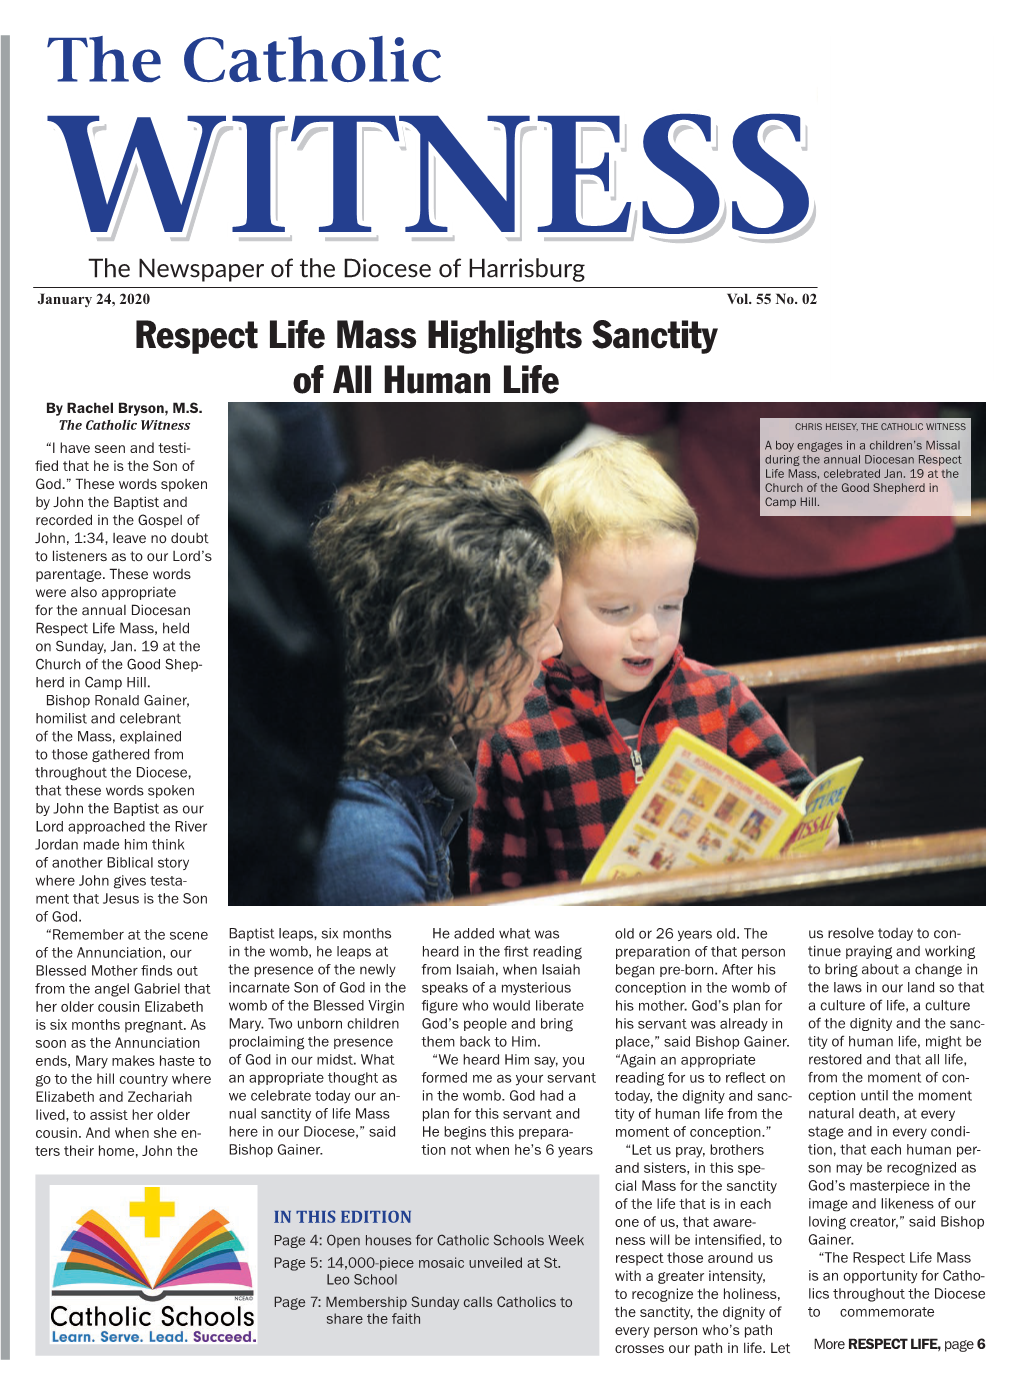 The Catholic WITNESSWITNESS the Newspaper of the Diocese of Harrisburg January 24, 2020 Vol